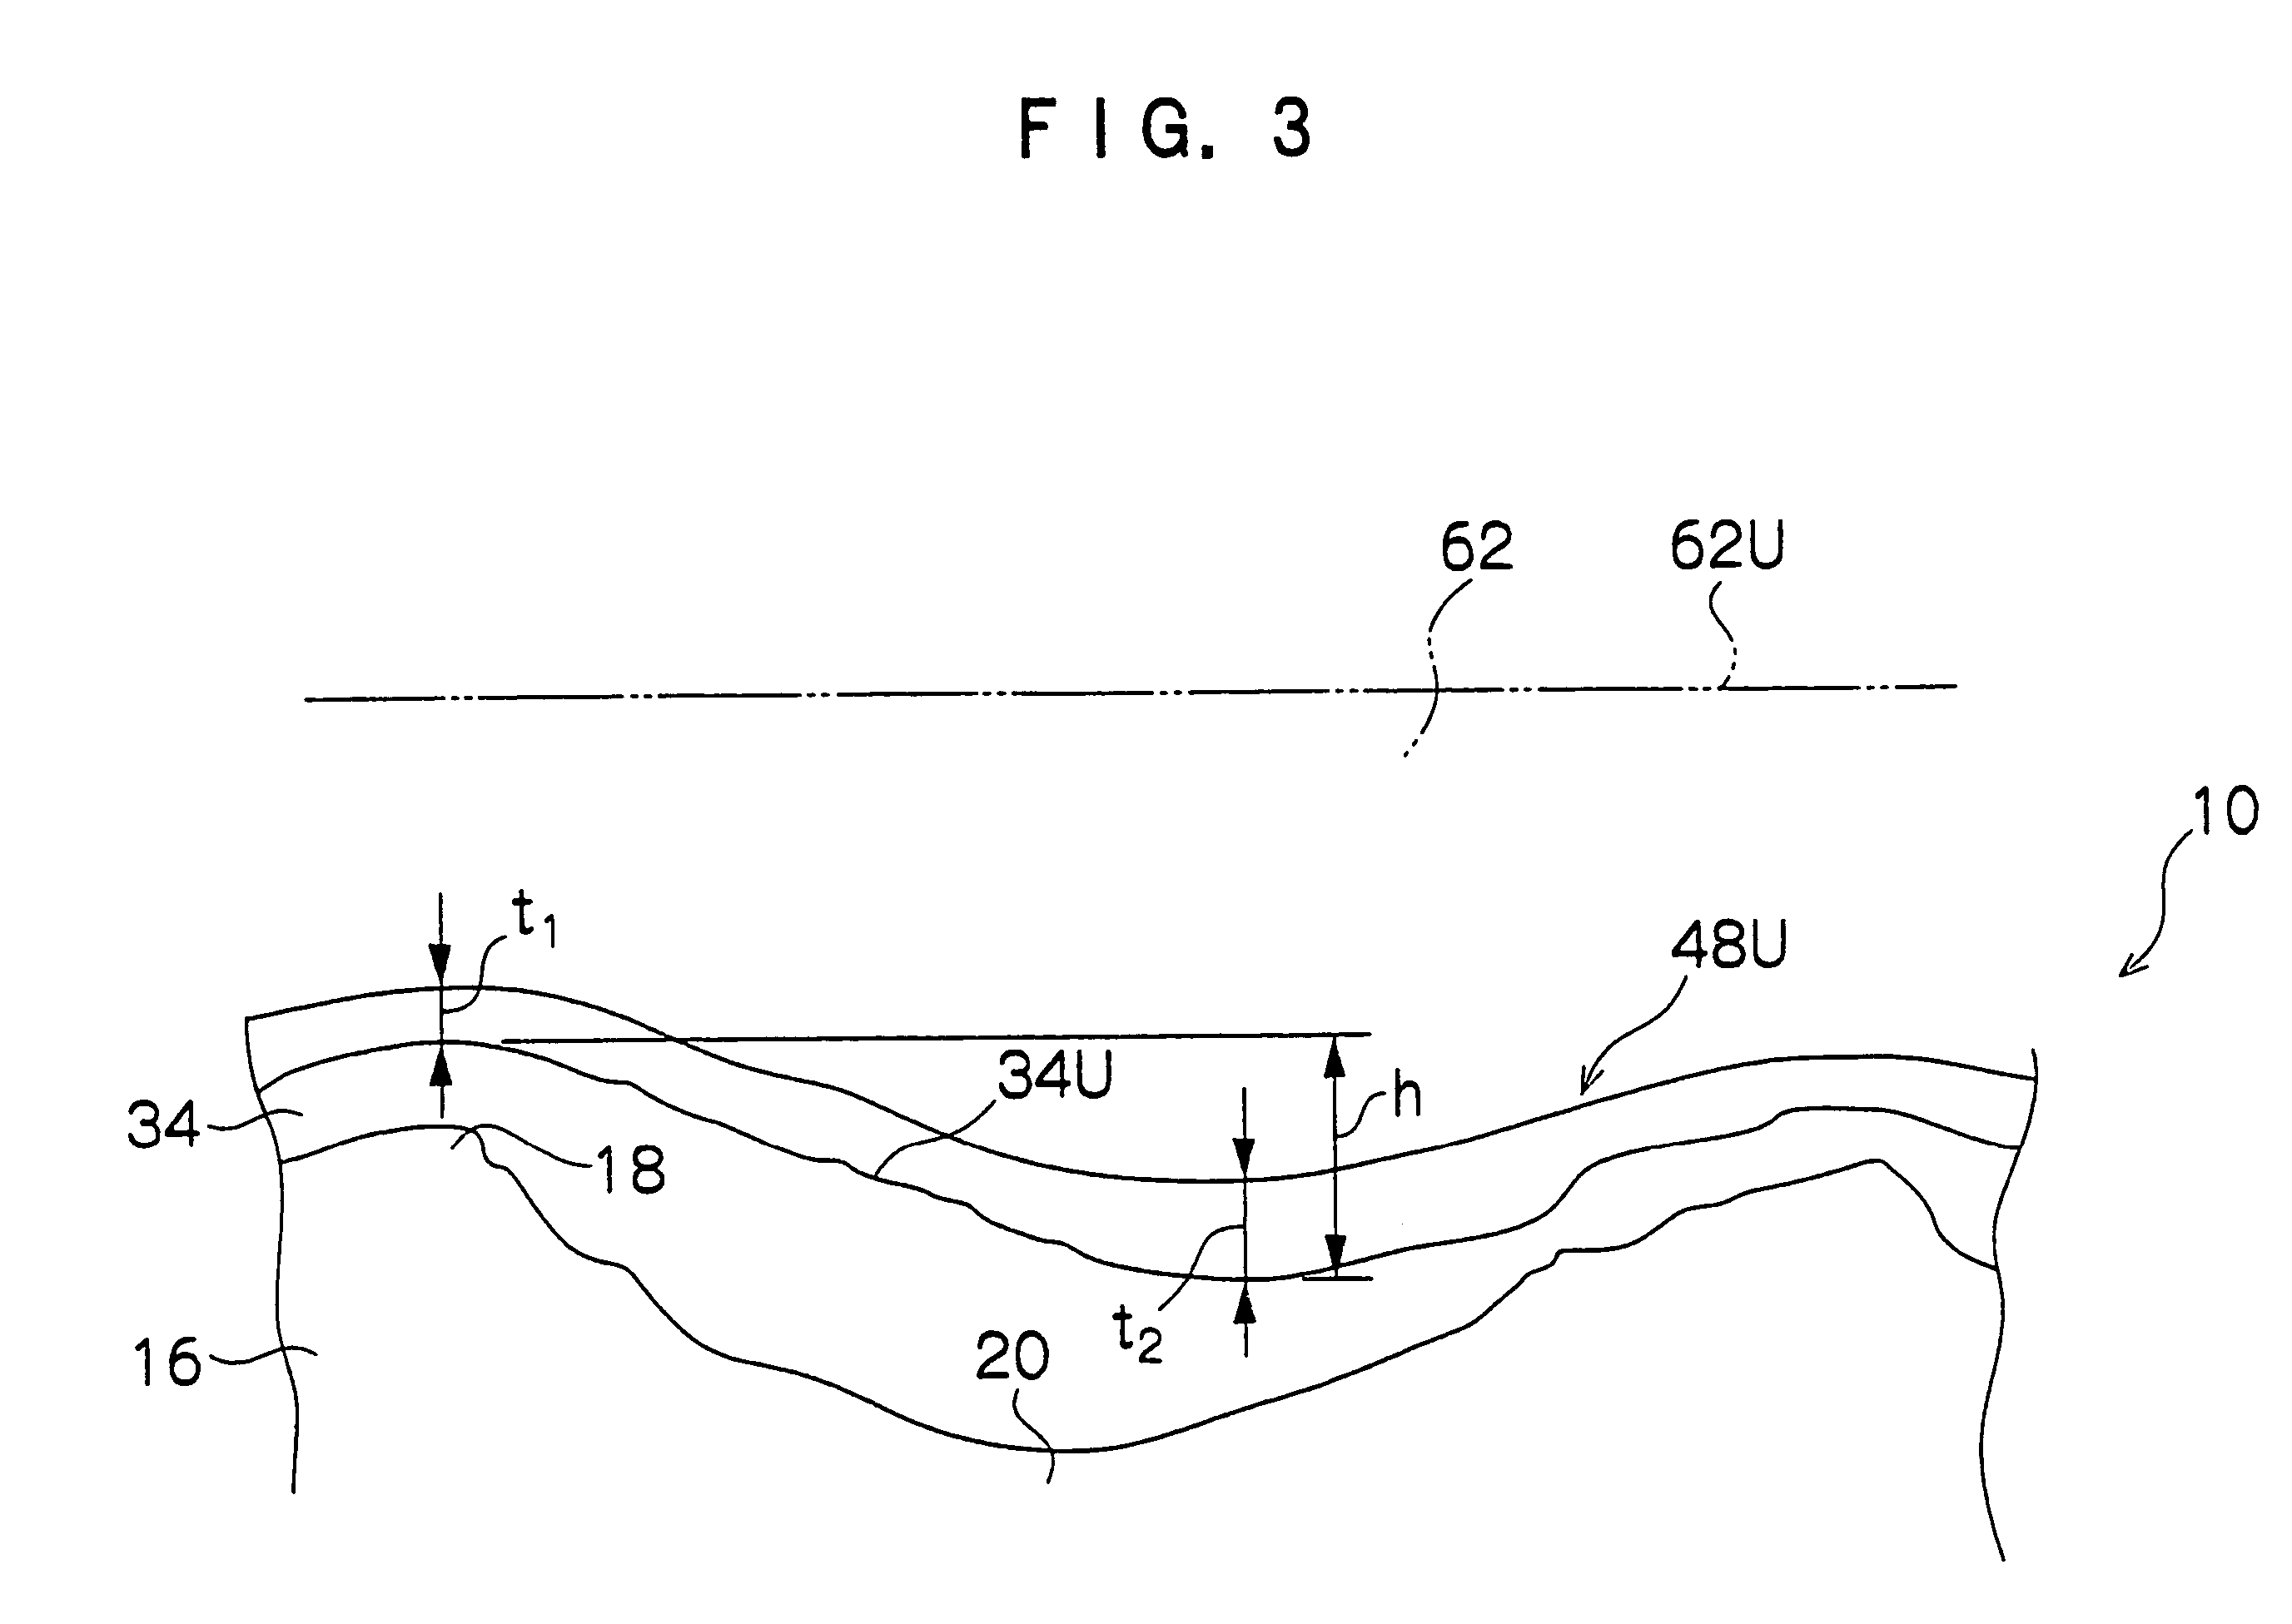 Photosensitive planographic printing plate and method of producing the same